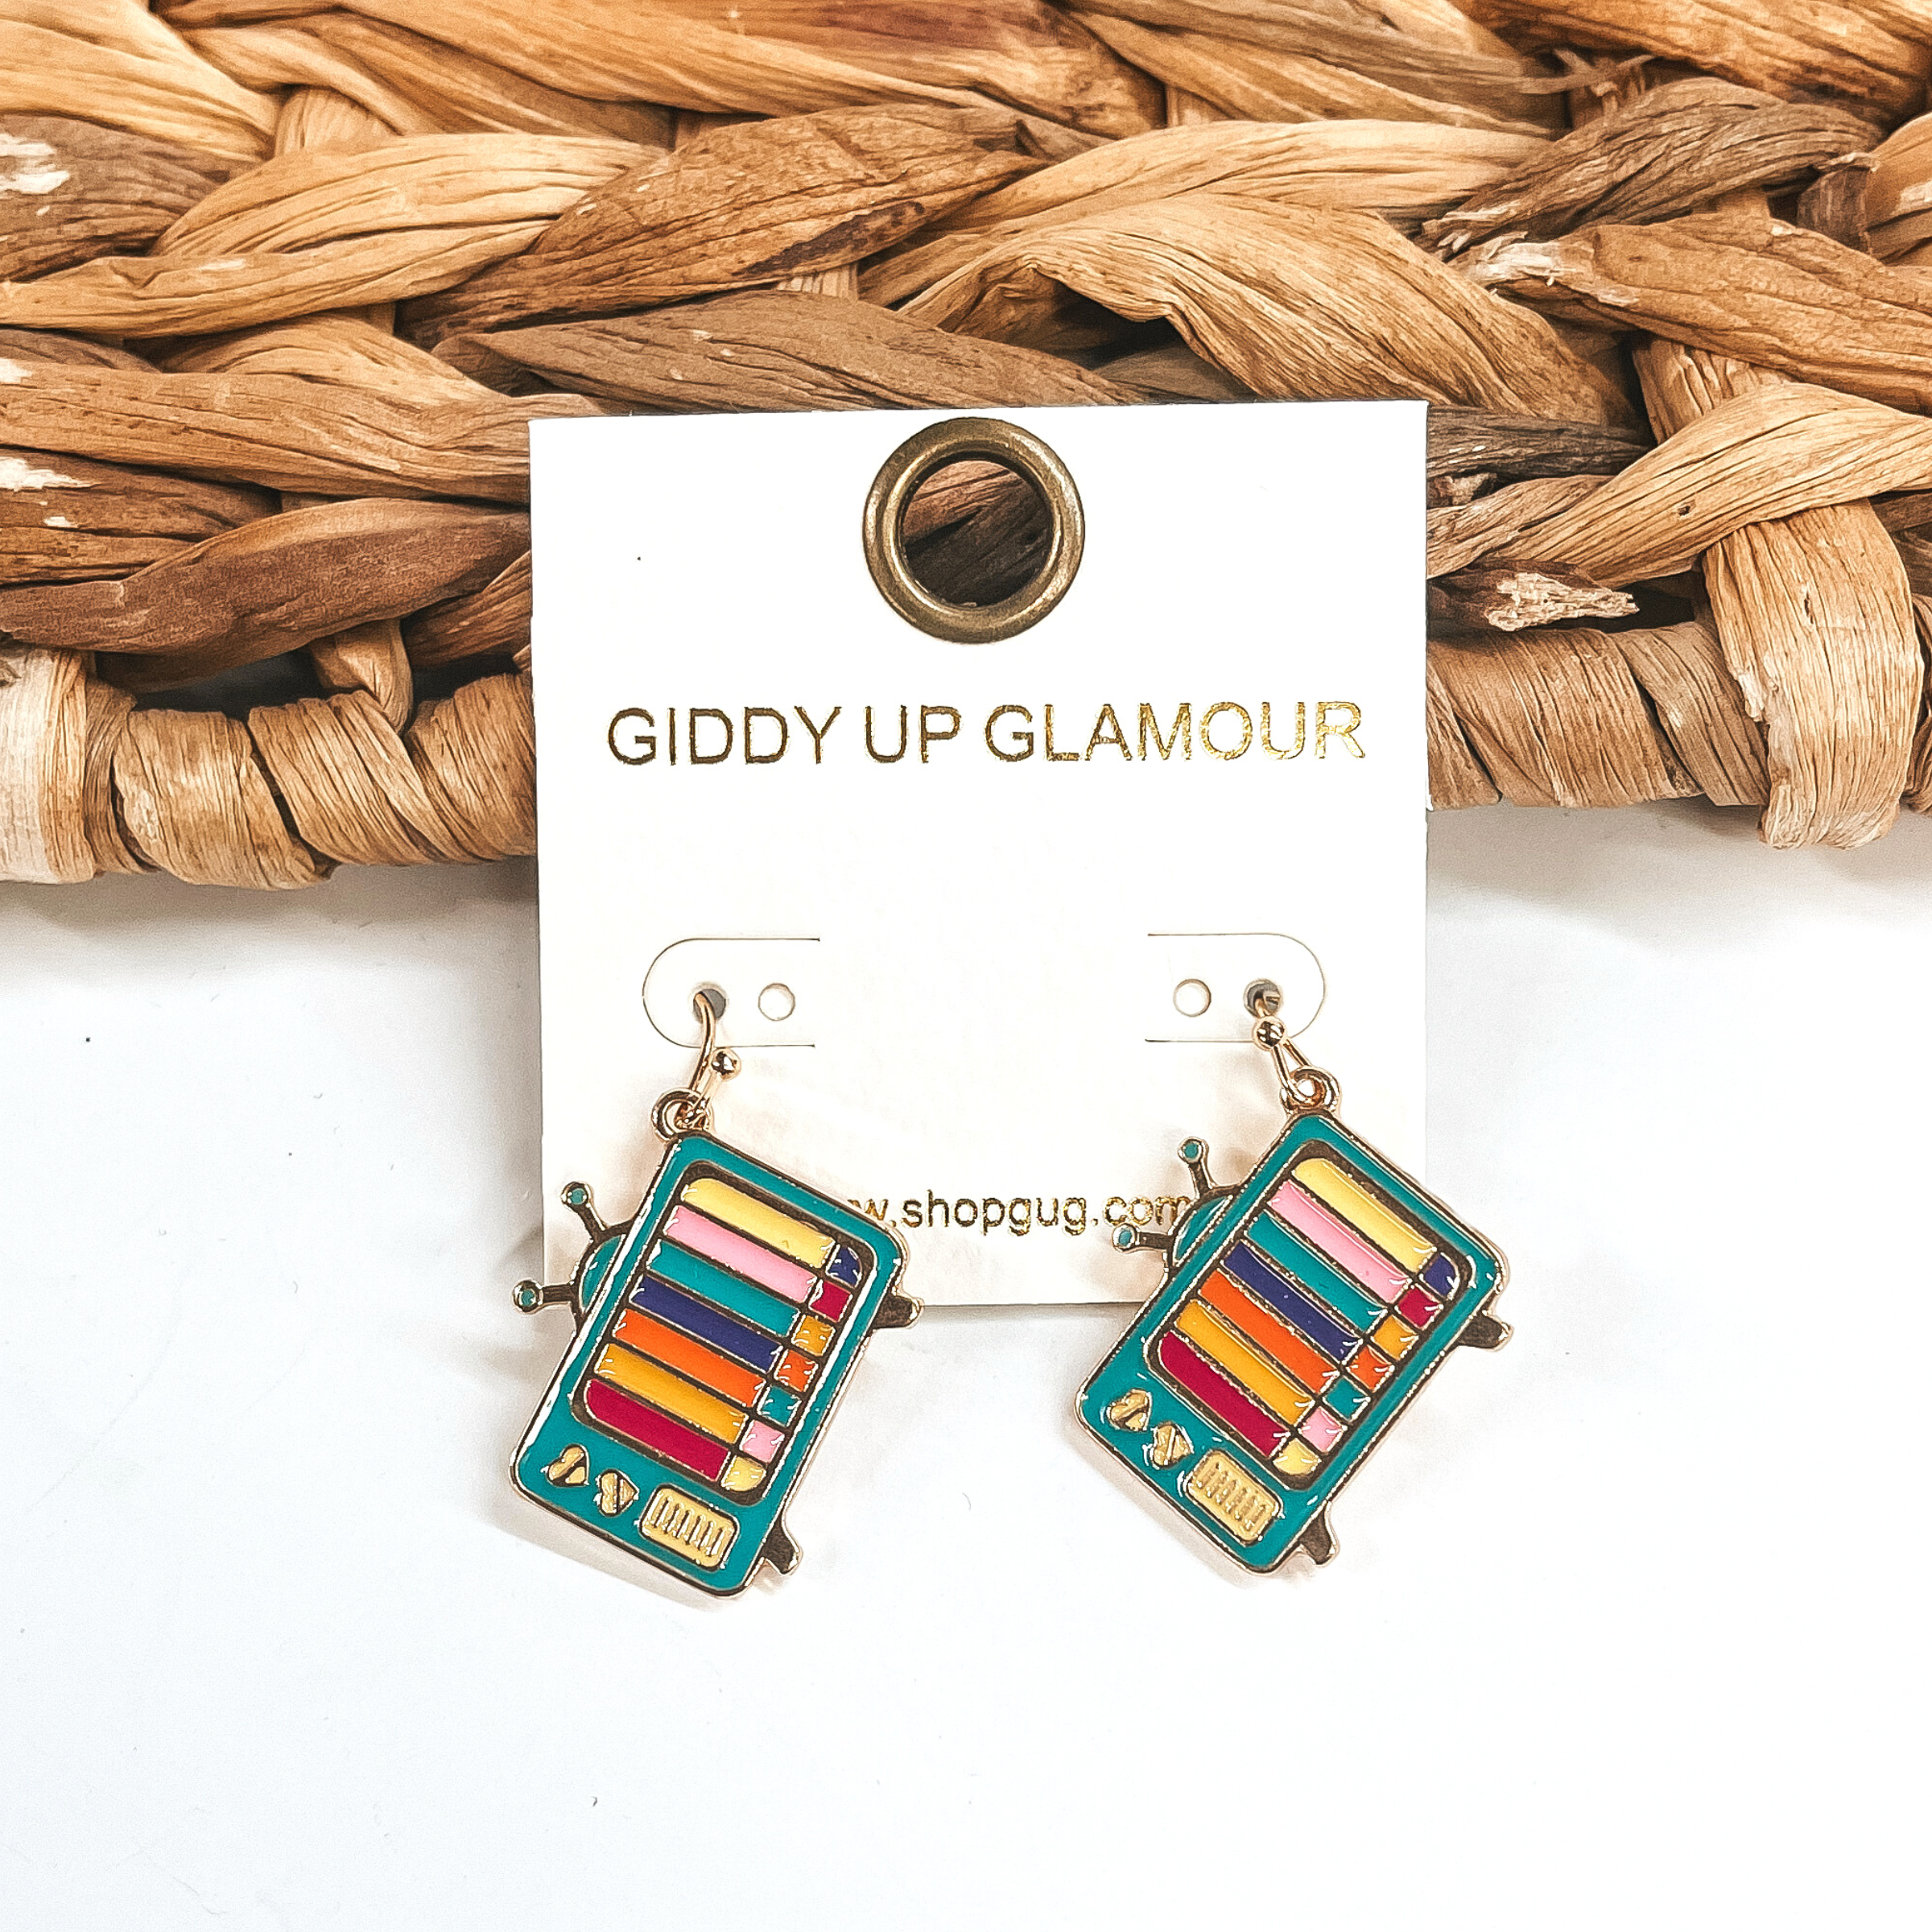 These are television shape earrings in teal blue-green and multicolor lines on the screen in a  gold setting. There are small hearts in the side of the TV.  These earrings are taken leaning up against a brown woven slate and on a white  background.